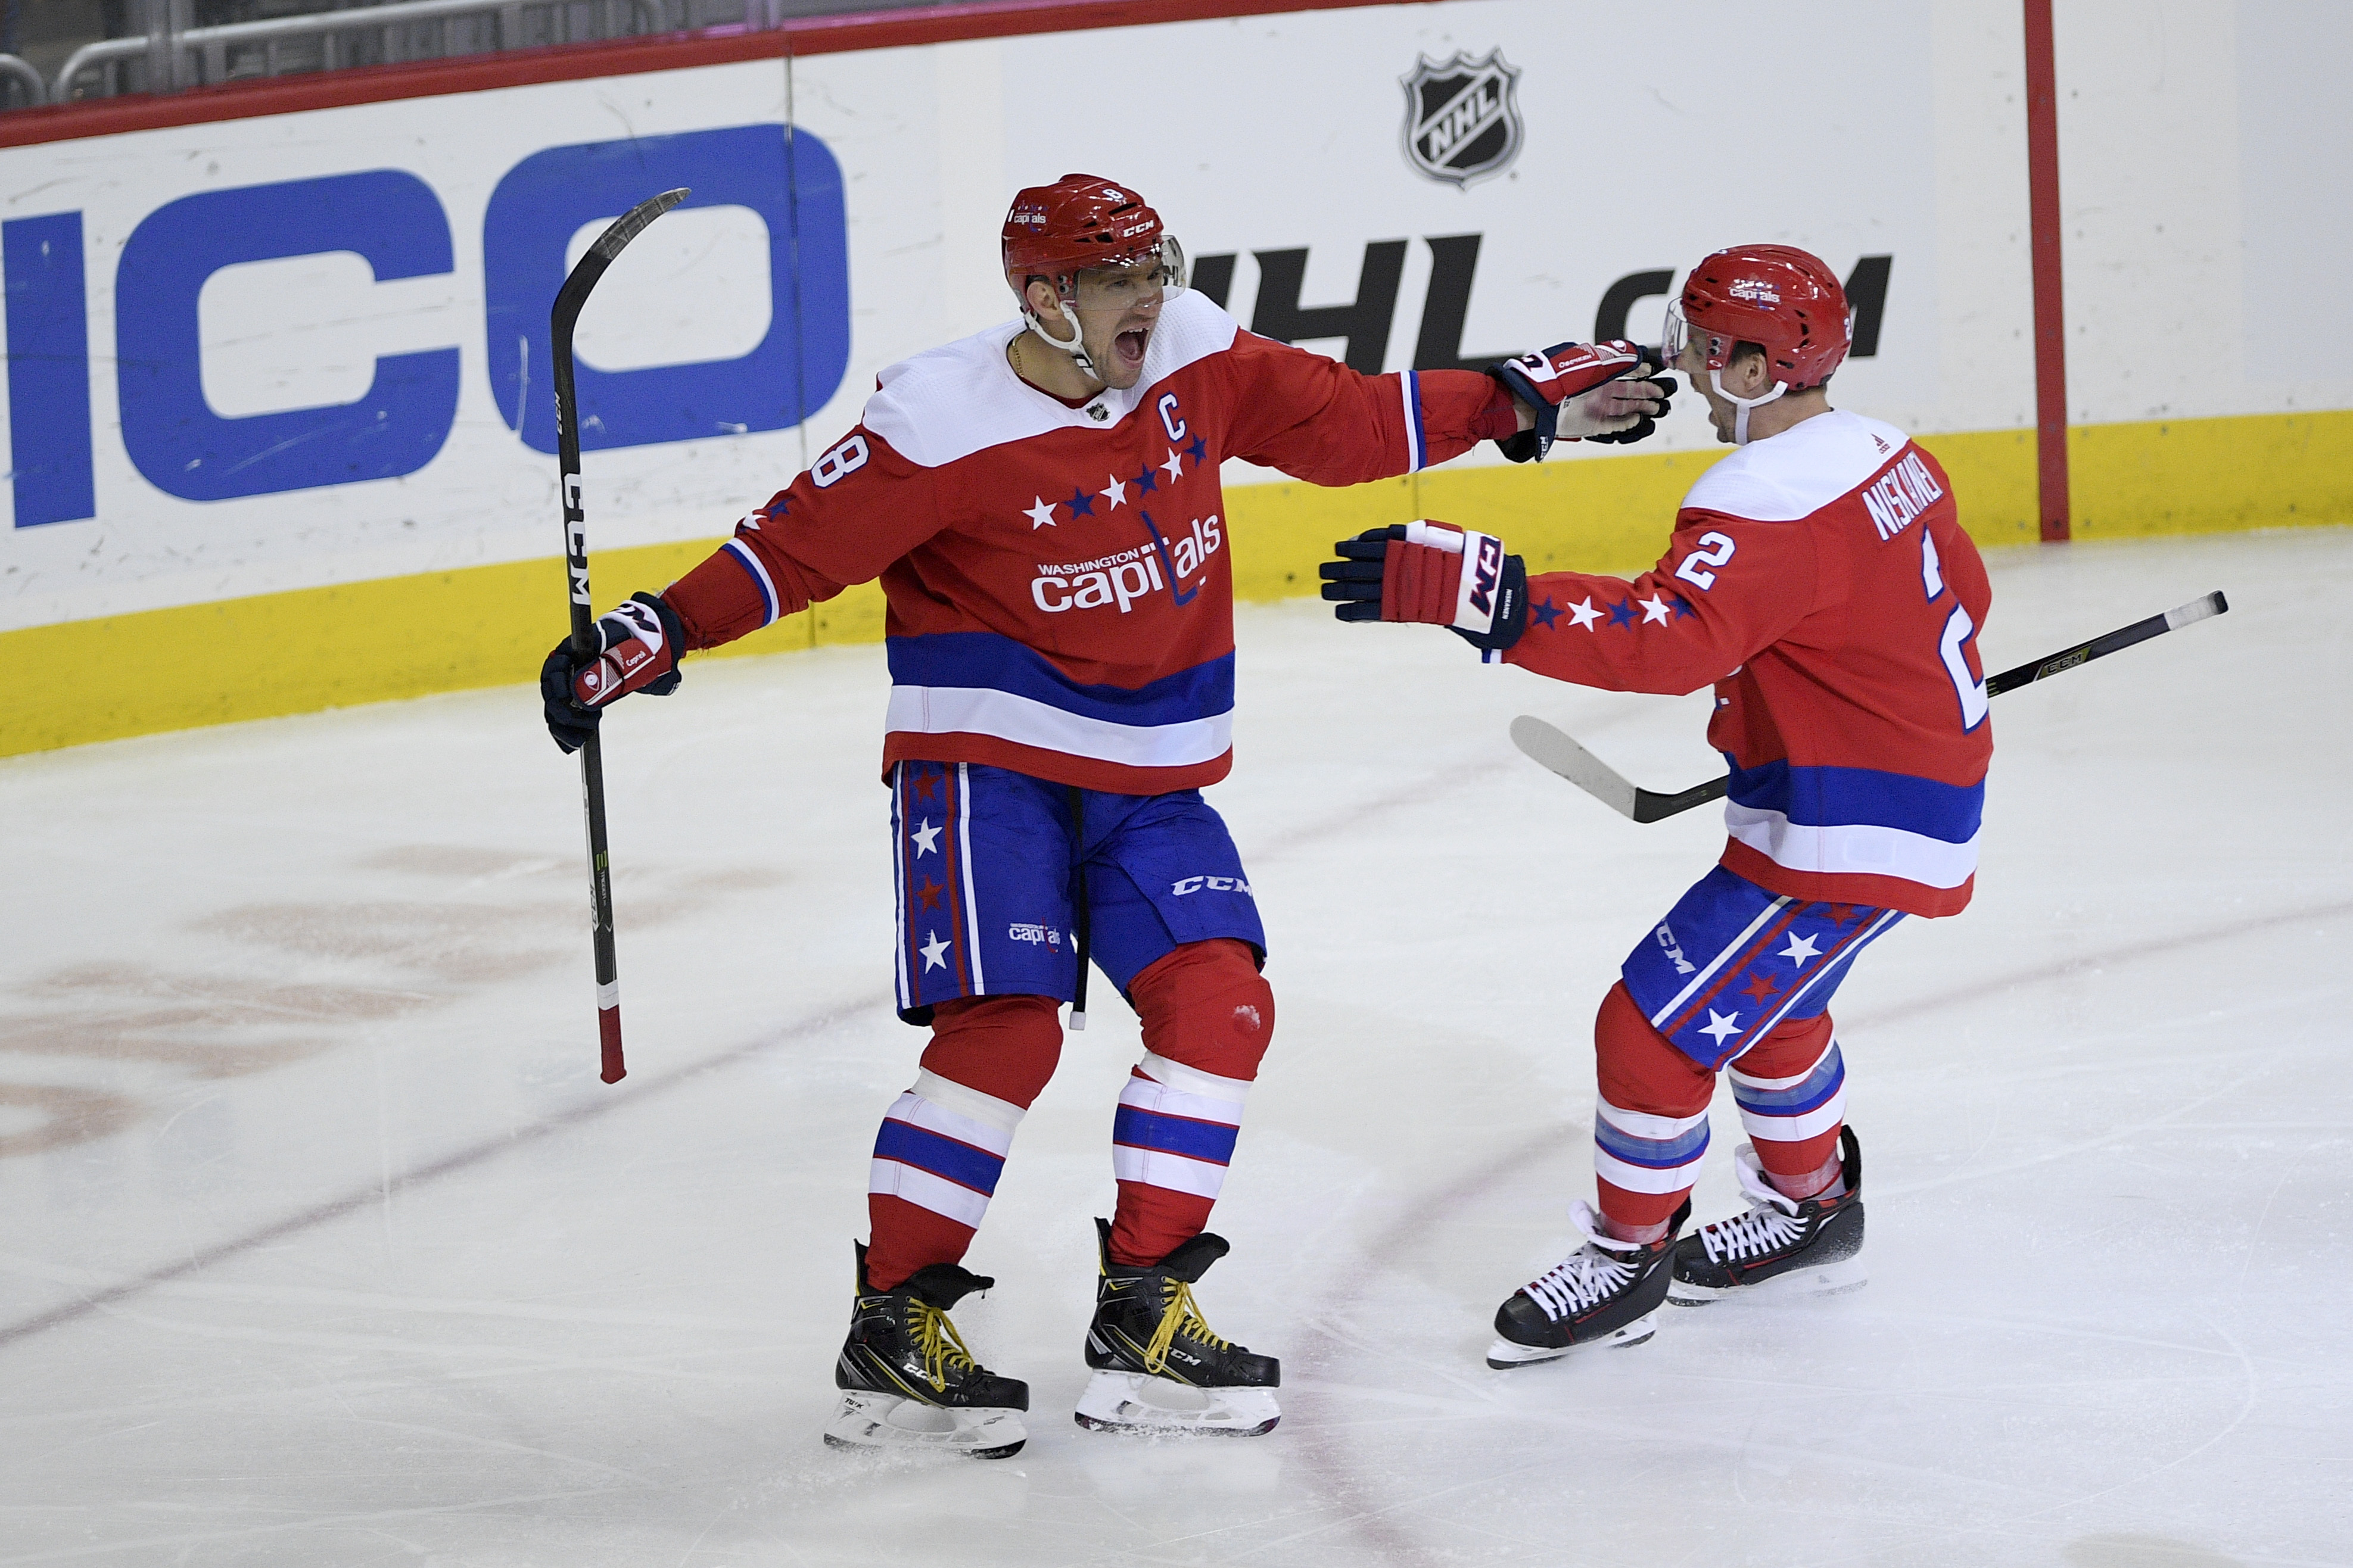 Ovechkin ends scoring drought, Capitals beat Hurricanes 4-1